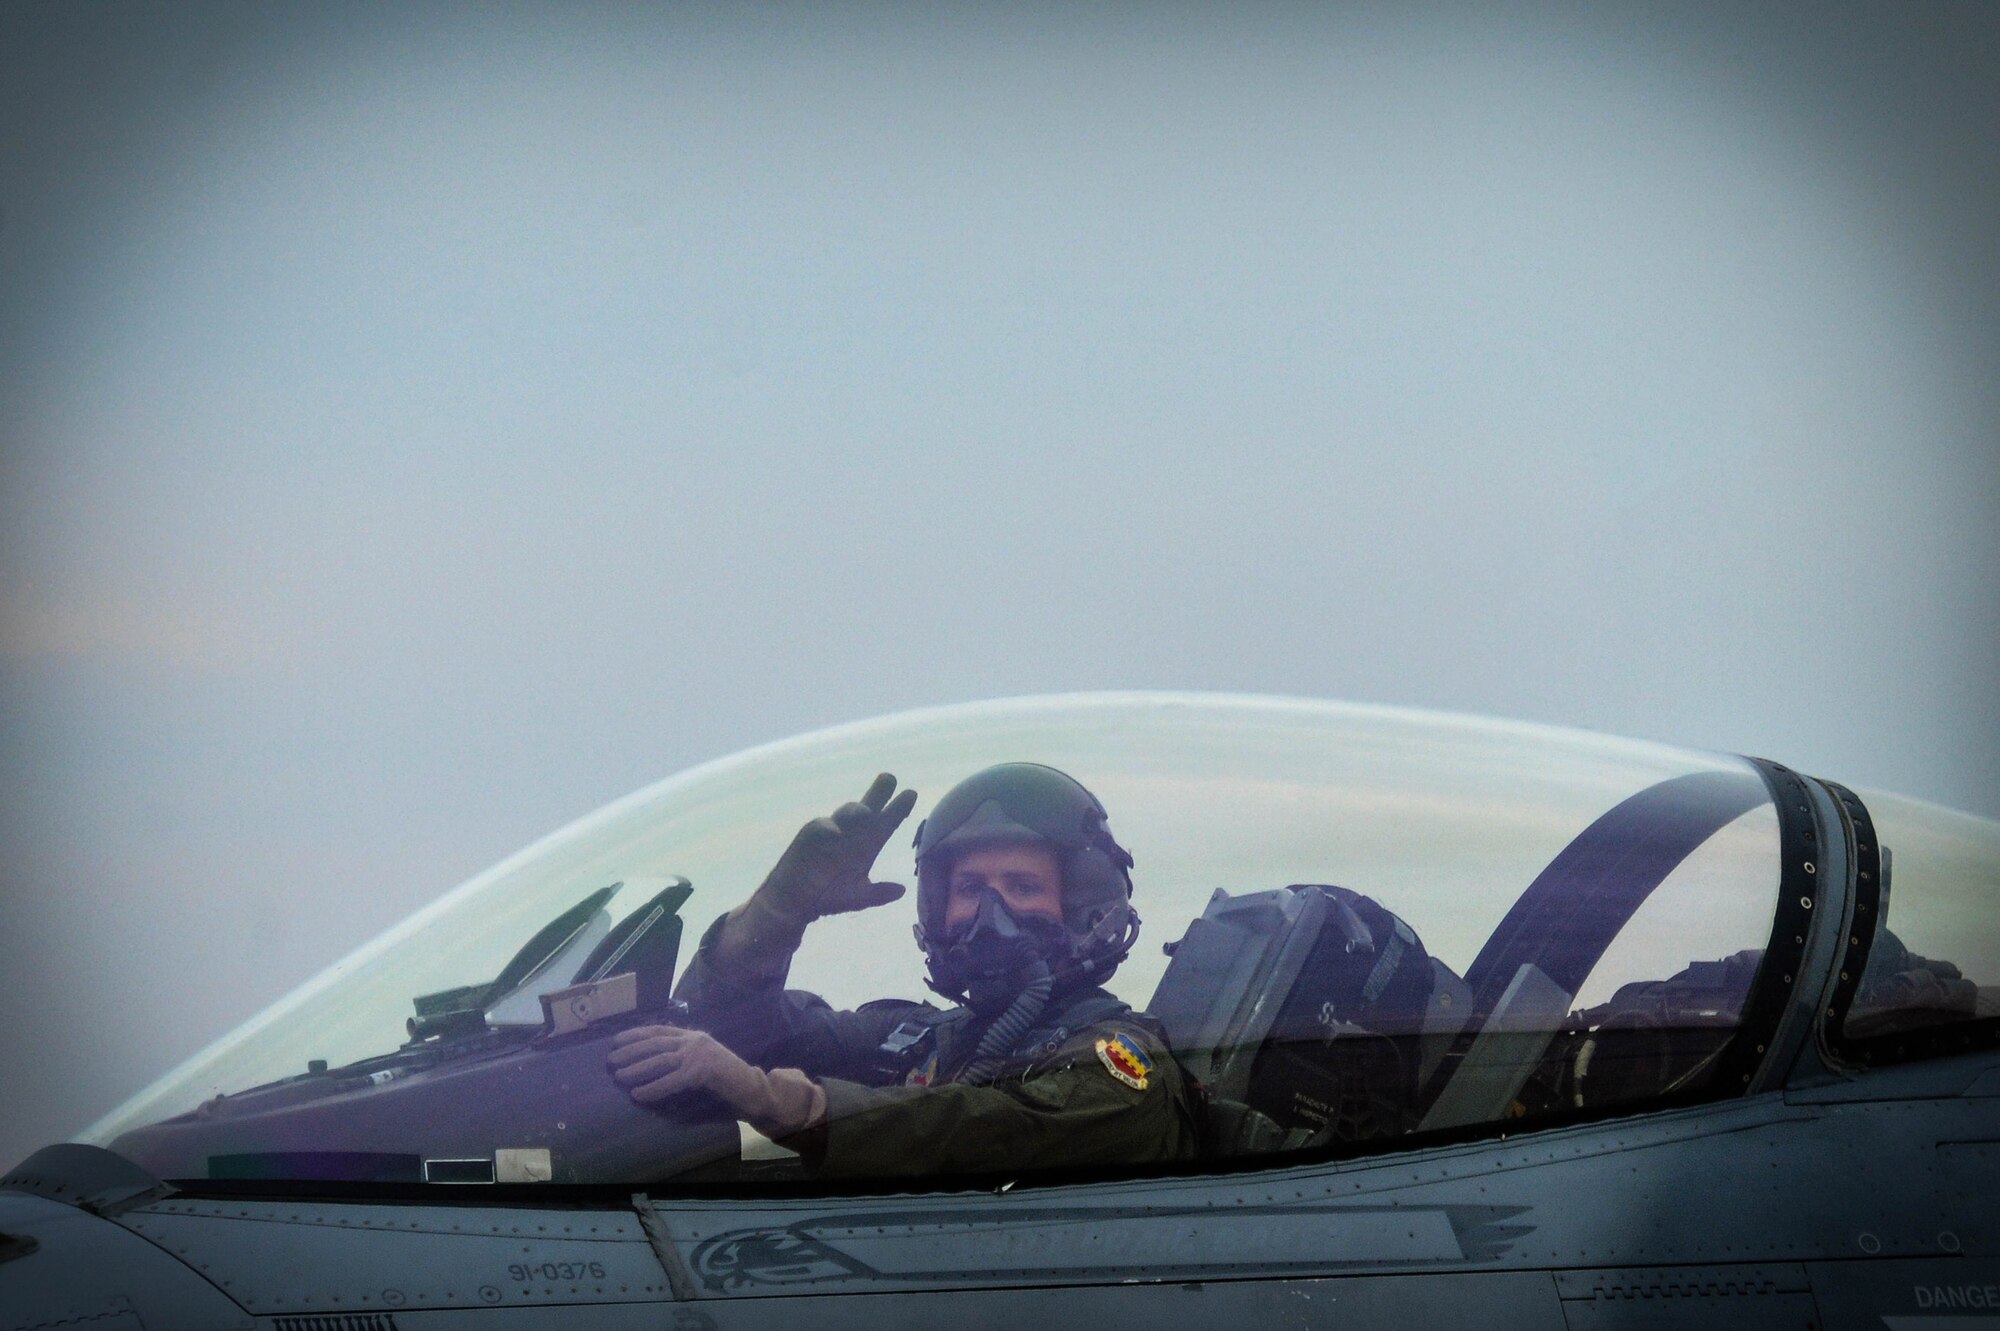 U.S. Air Force Capt. John Waters, F-16 Viper Demonstration Team pilot, waves before takeoff for the 20th Fighter Wing certification flight over Shaw Air Force Base, S.C., Jan. 9, 2017. The mission of the team is to inspire the future generation of pilots and maintainers through their combat demonstration of the aircraft. The F-16CM Fighting Falcon has a General Electric F-129 engine capable of producing over 27,000 pounds of thrust, which translates to more horse power than the entire starting lineup of the Indianapolis 500. (U.S. Air Force photo by Senior Airman Michael Cossaboom)